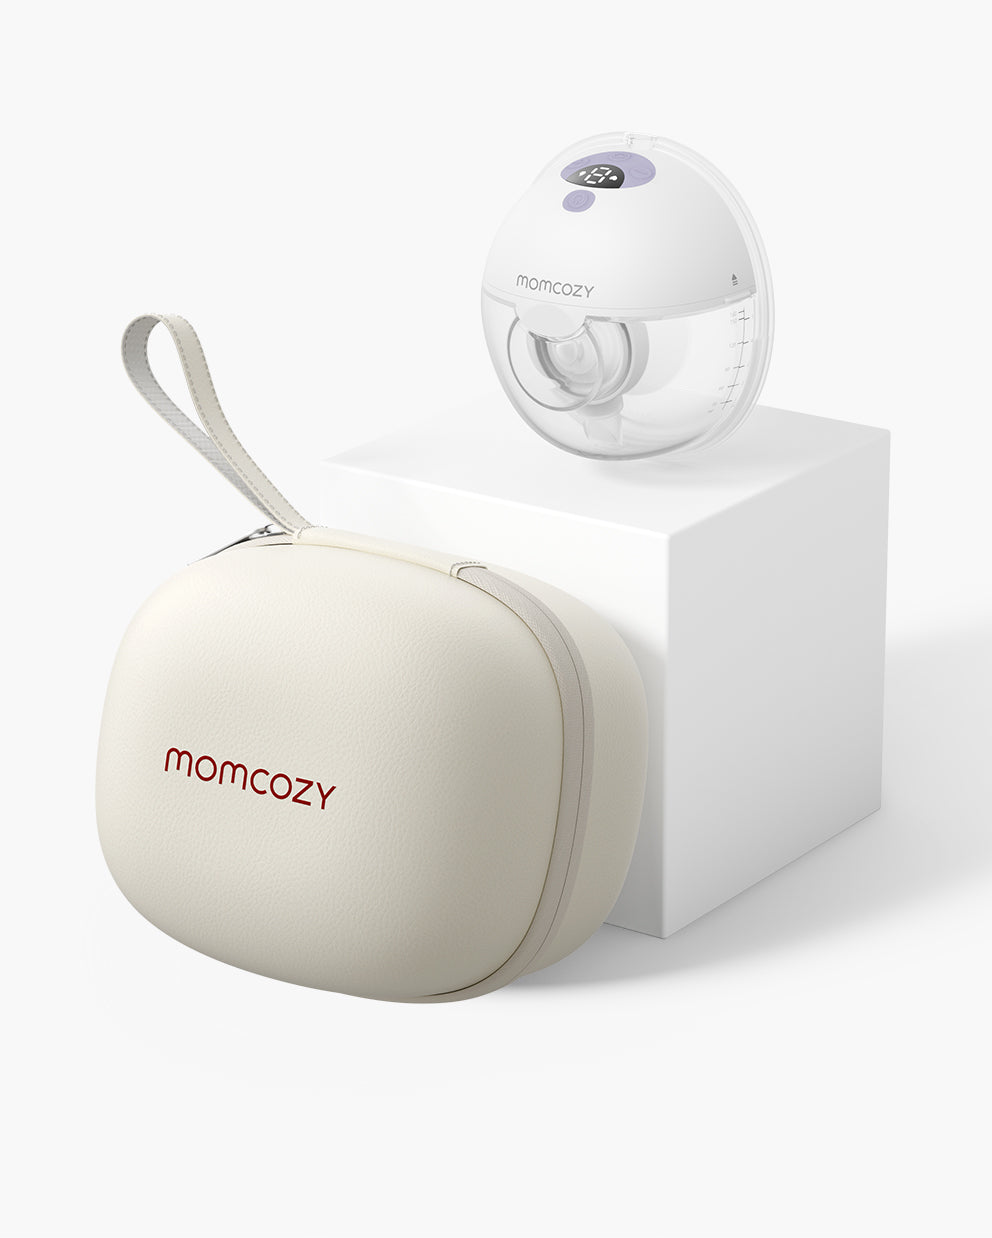 Momcozy on Instagram: Designed to seamlessly transition between